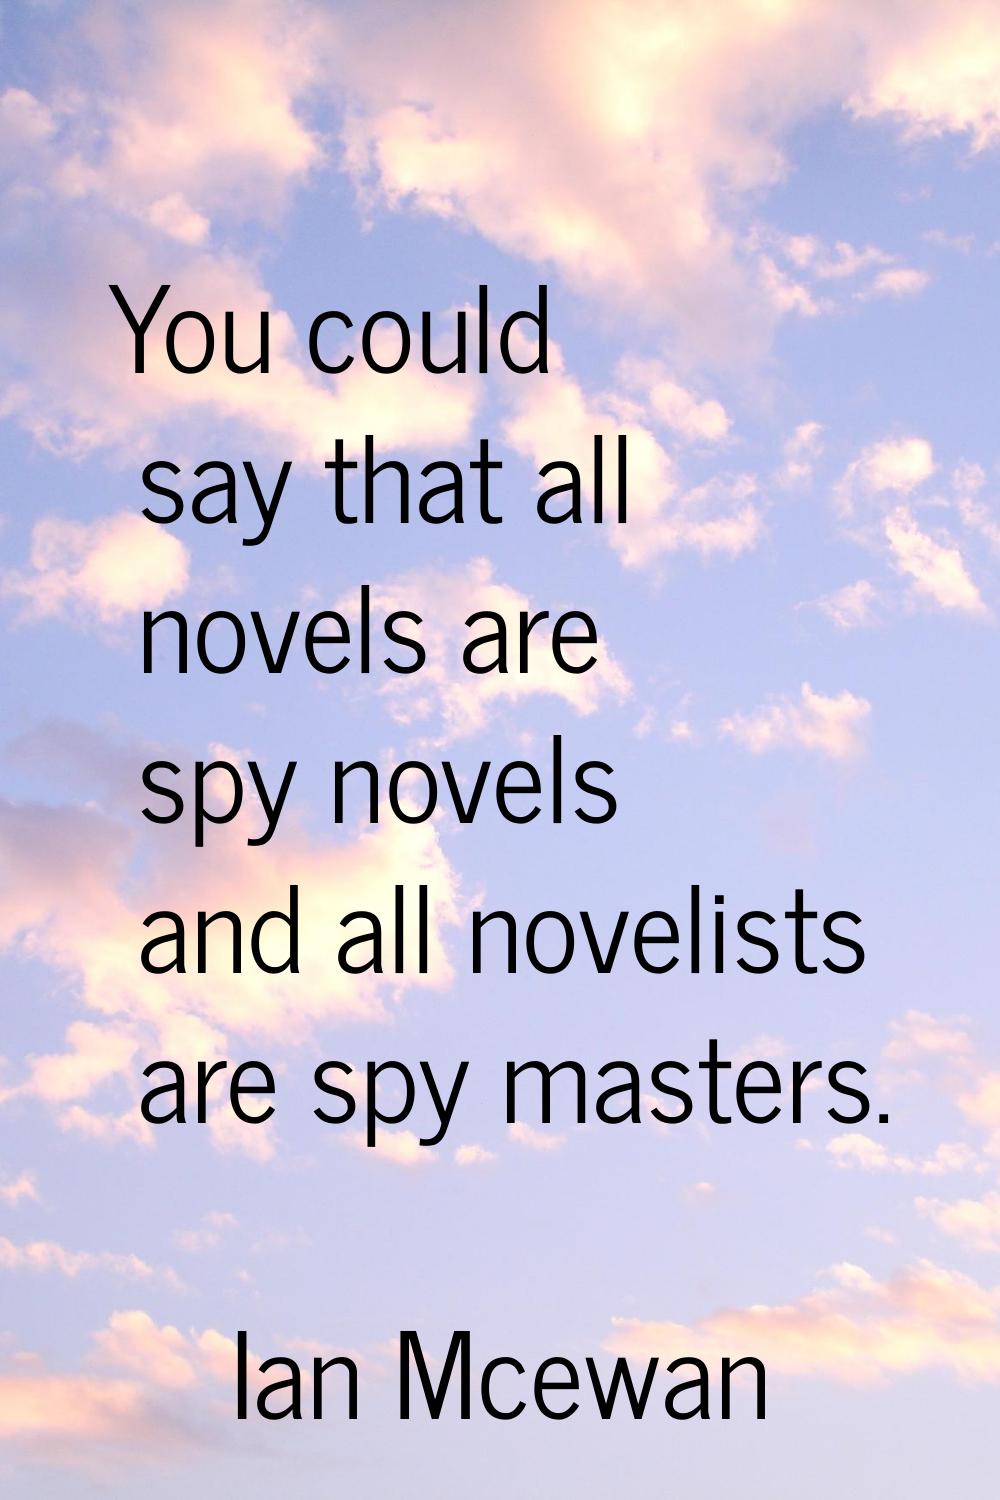 You could say that all novels are spy novels and all novelists are spy masters.